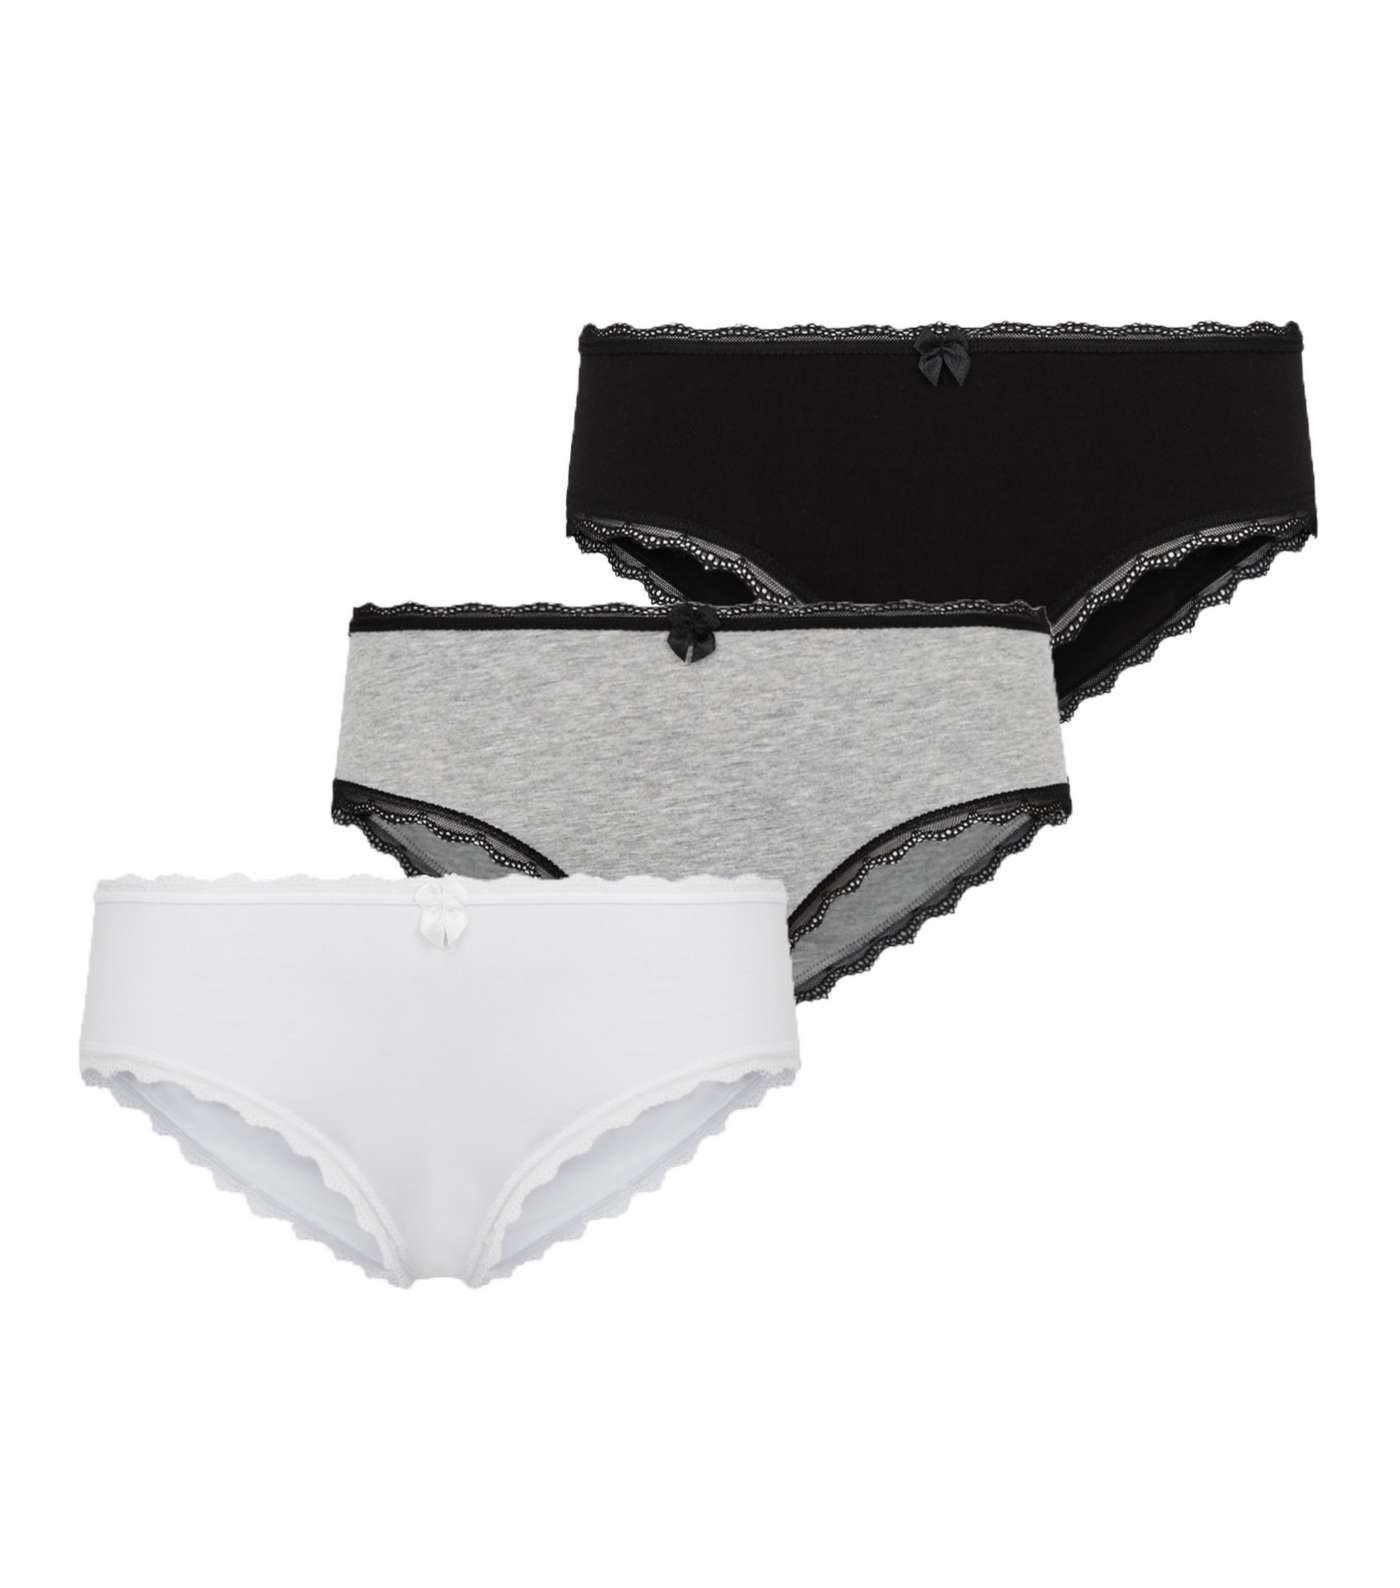 3 Pack Black White and Grey Lace Trim Short Briefs Image 3